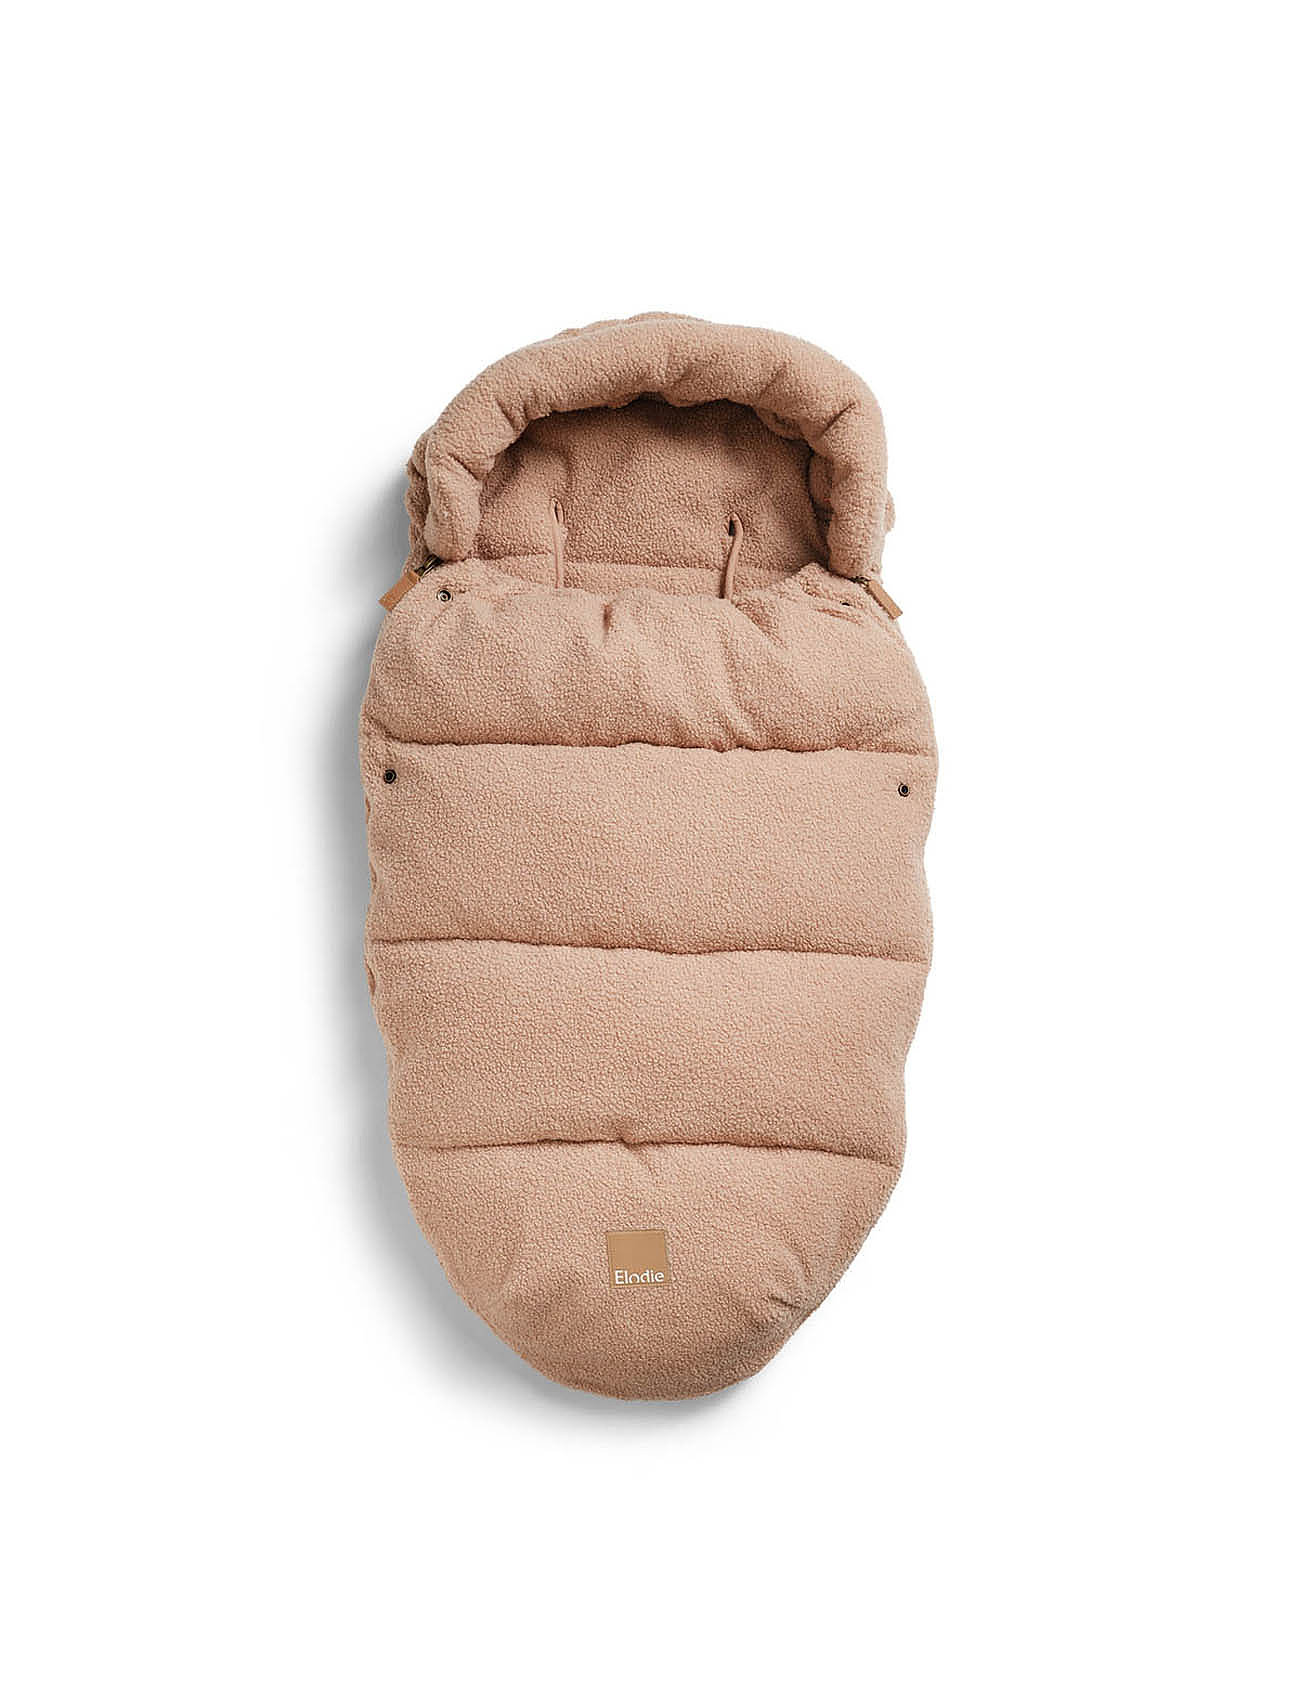 Footmuff - Pink Bouclé Baby & Maternity Strollers & Accessories Footmuffs Coral Elodie Details